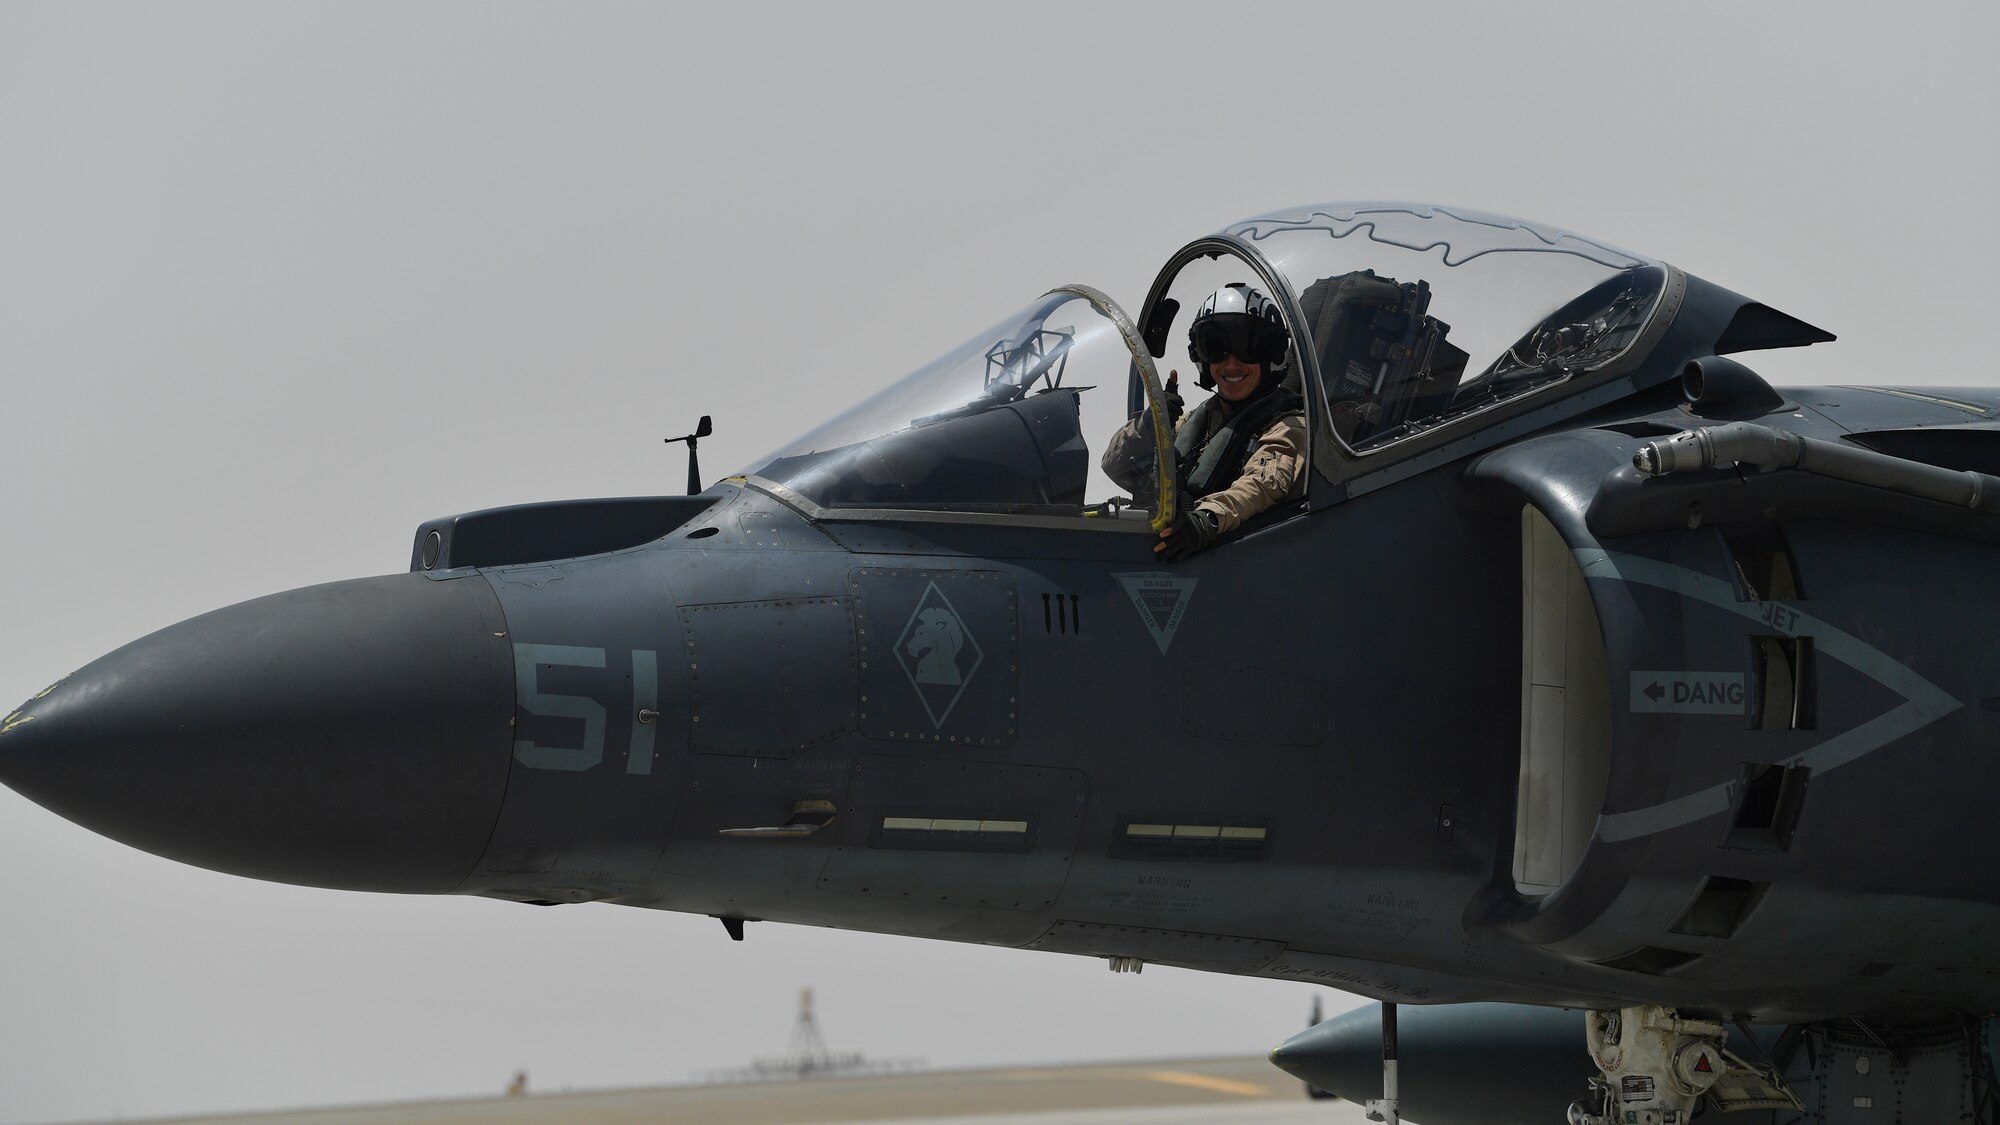 A U.S. Marine waves while taxiing in an AV-8B Harrier II during Desert Flag 19-2 in Southwest Asia, April 28, 2019. Desert Flag is designed to exercise combined Air Forces in military operations to enhance competence and strengthen military-to-military relationships and regional security.